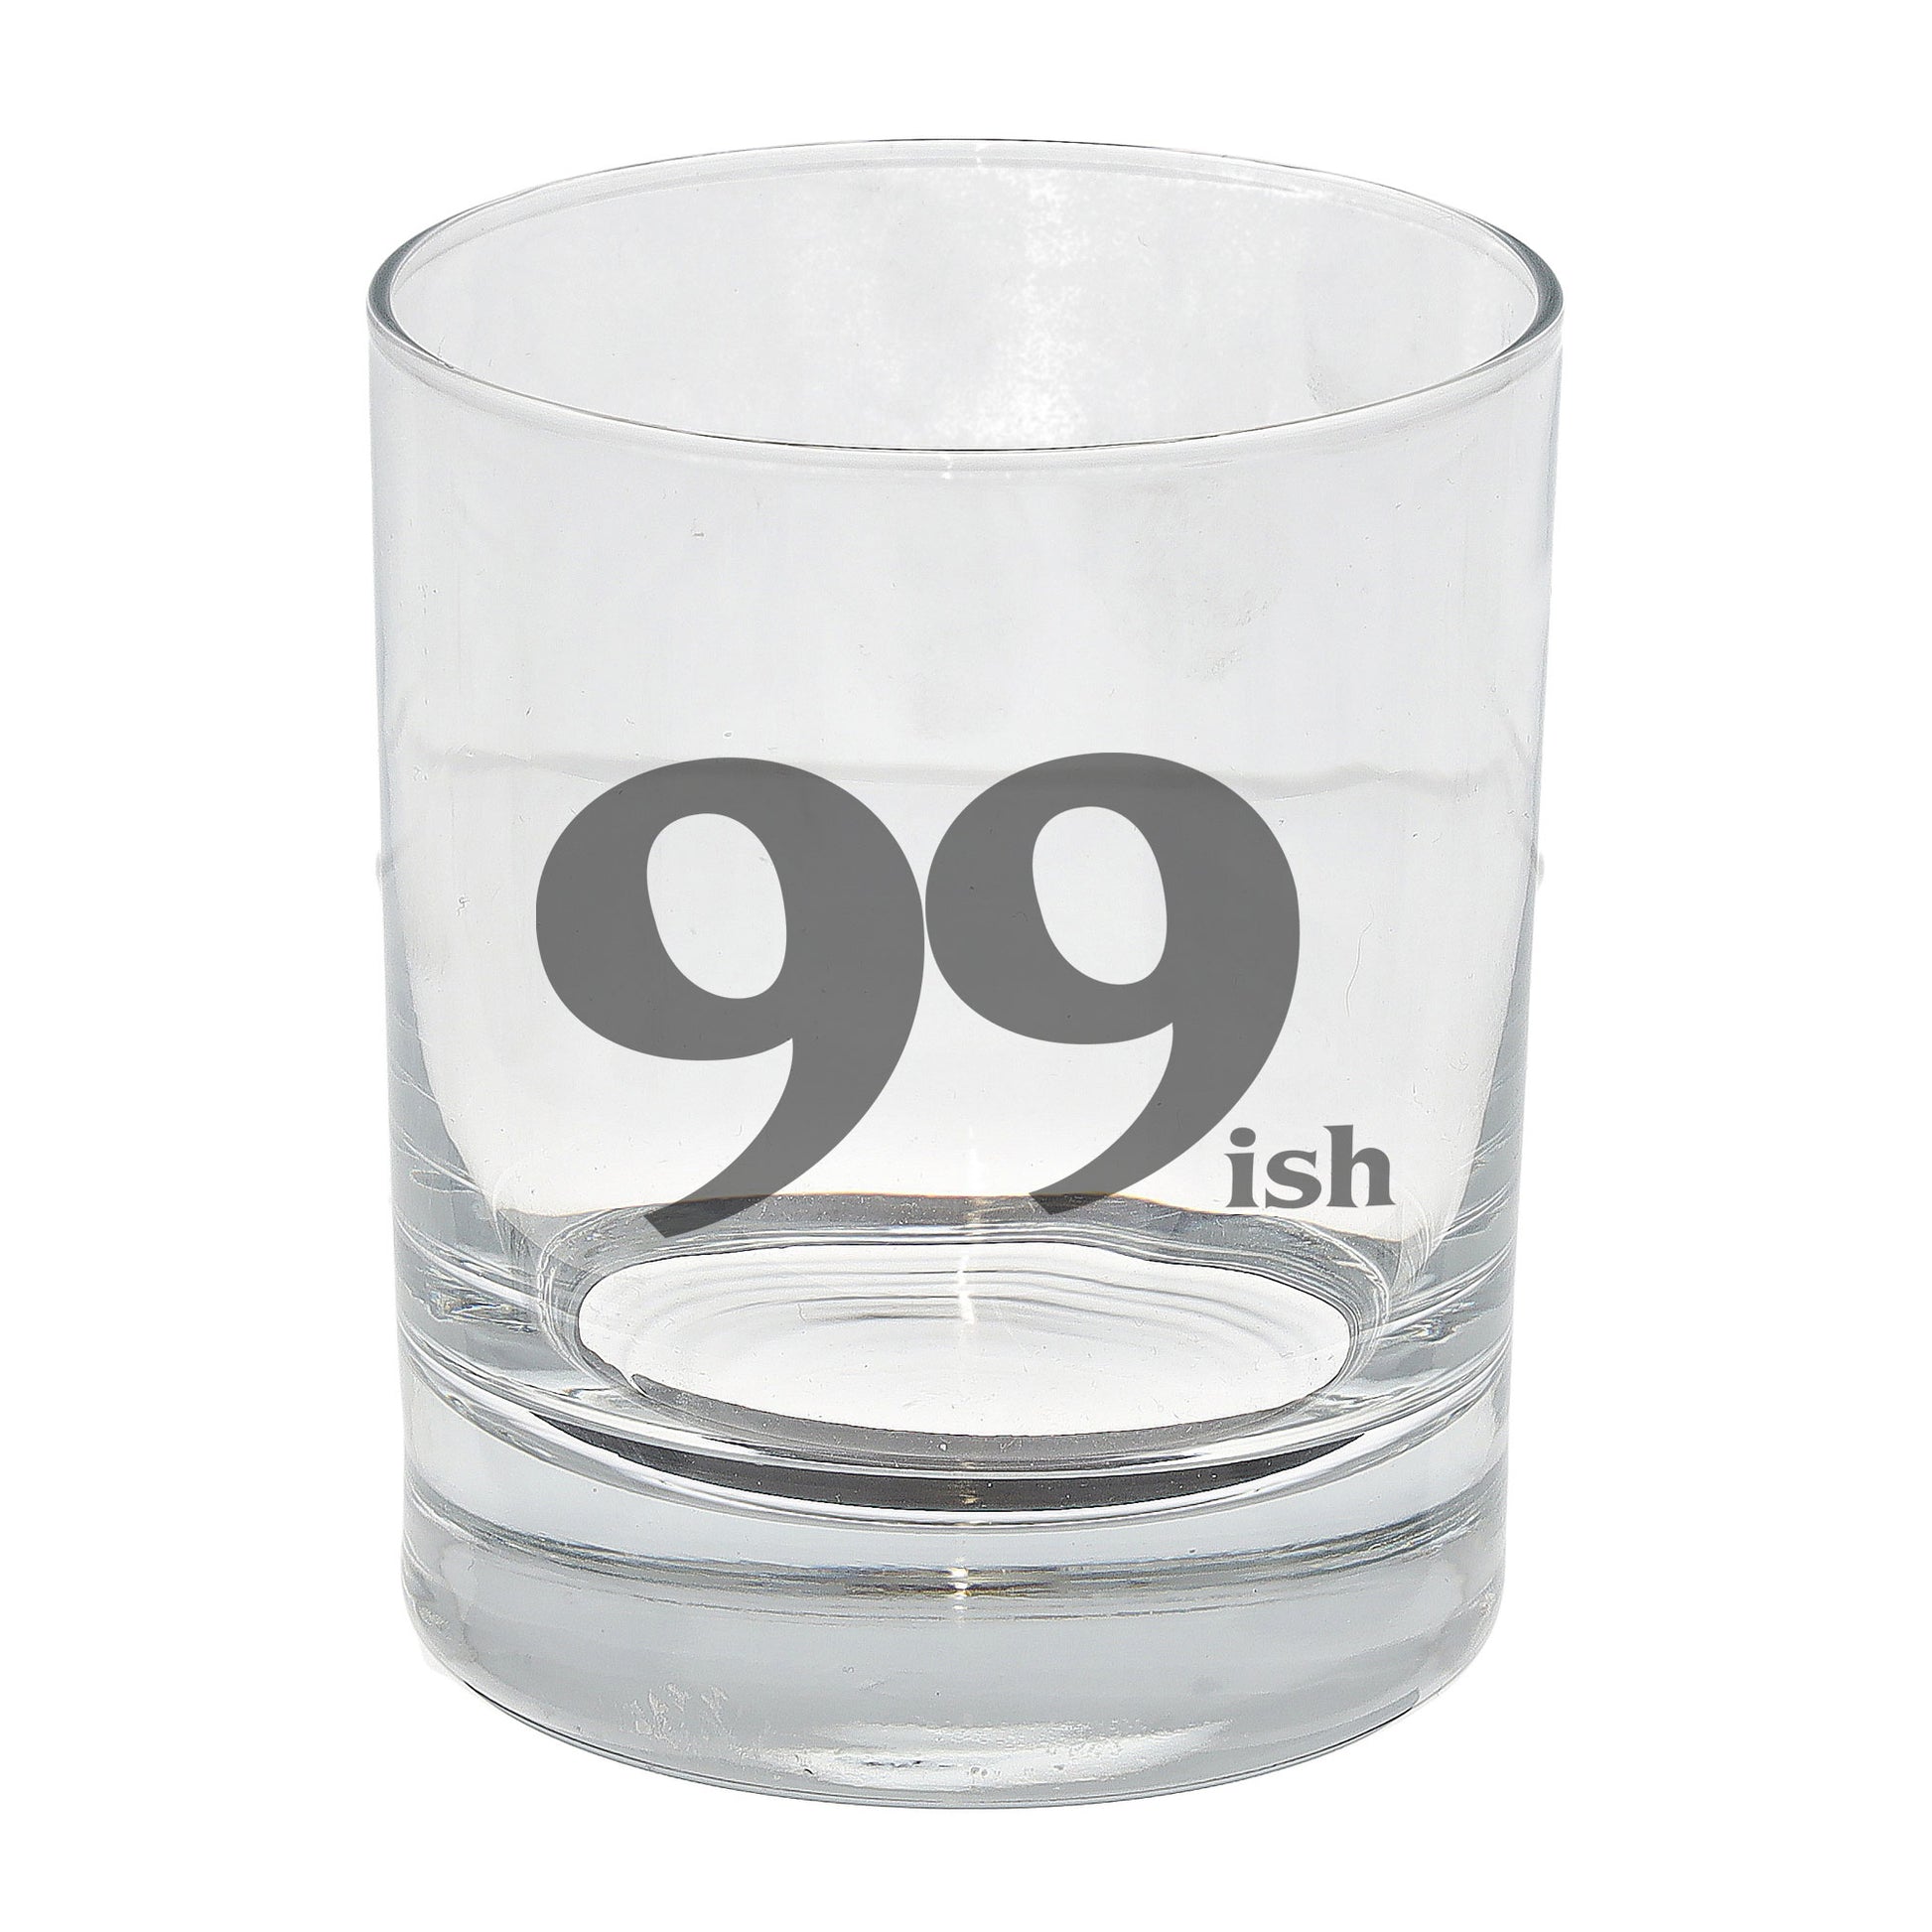 99ish Whisky Glass and/or Coaster Set  - Always Looking Good - Whisky Glass On Its Own  